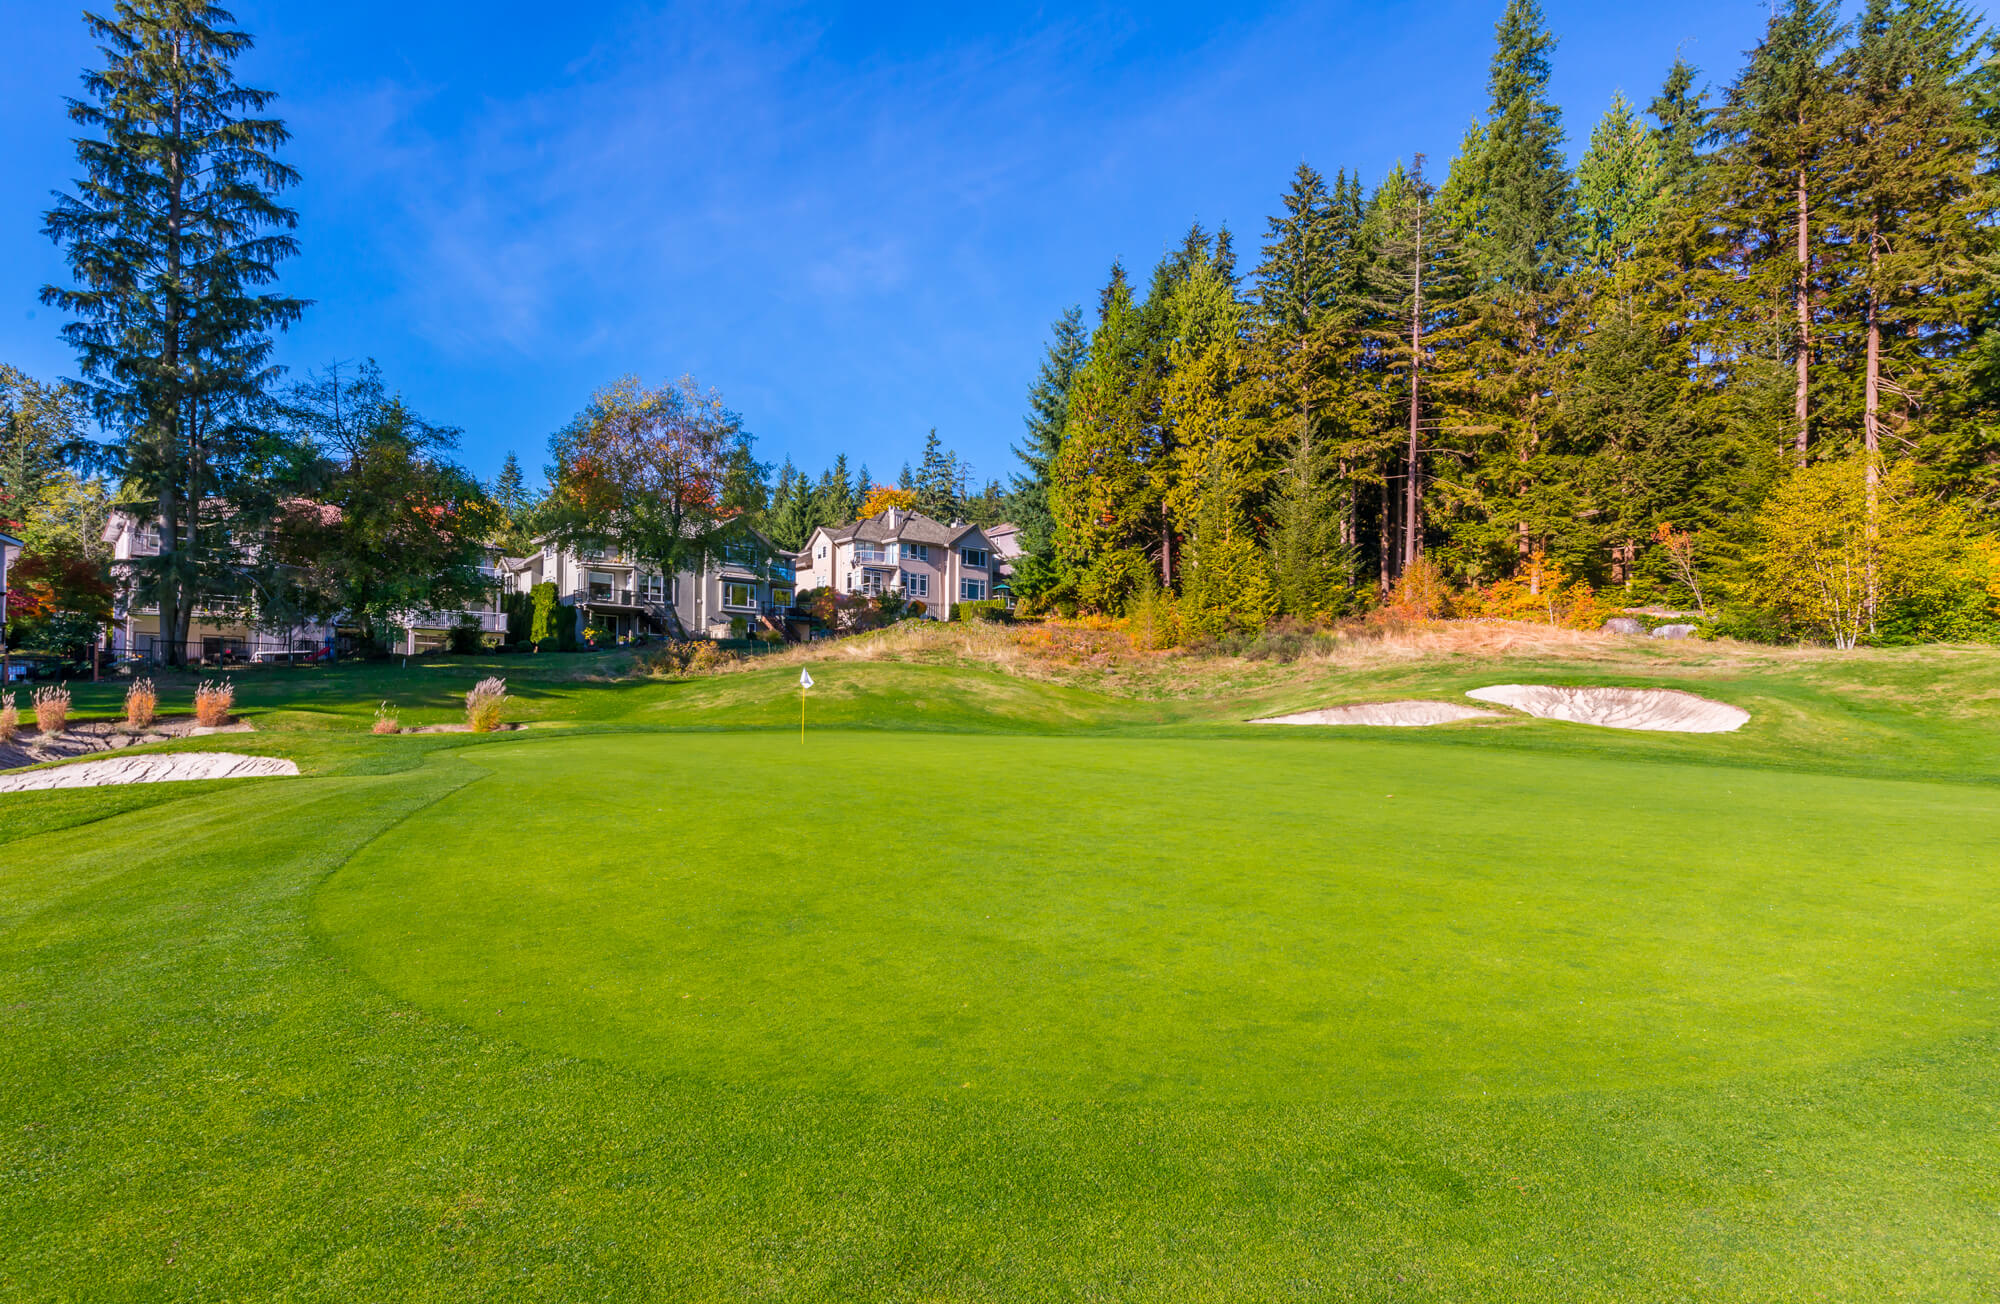 Golf Course Homes in Boise ID